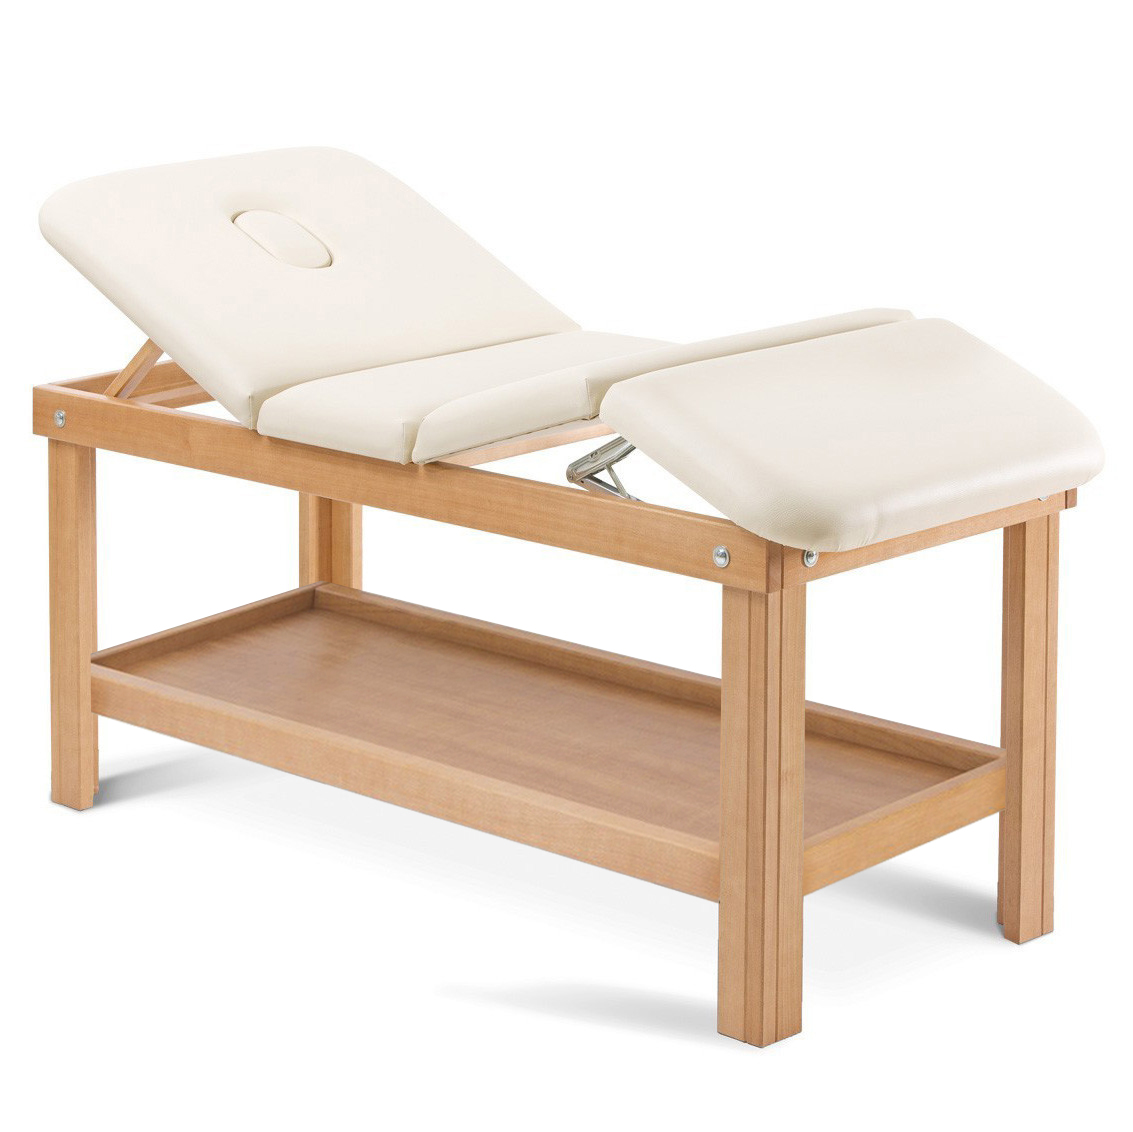 Wooden beauty treatment couch with 2 joints, face hole and table top